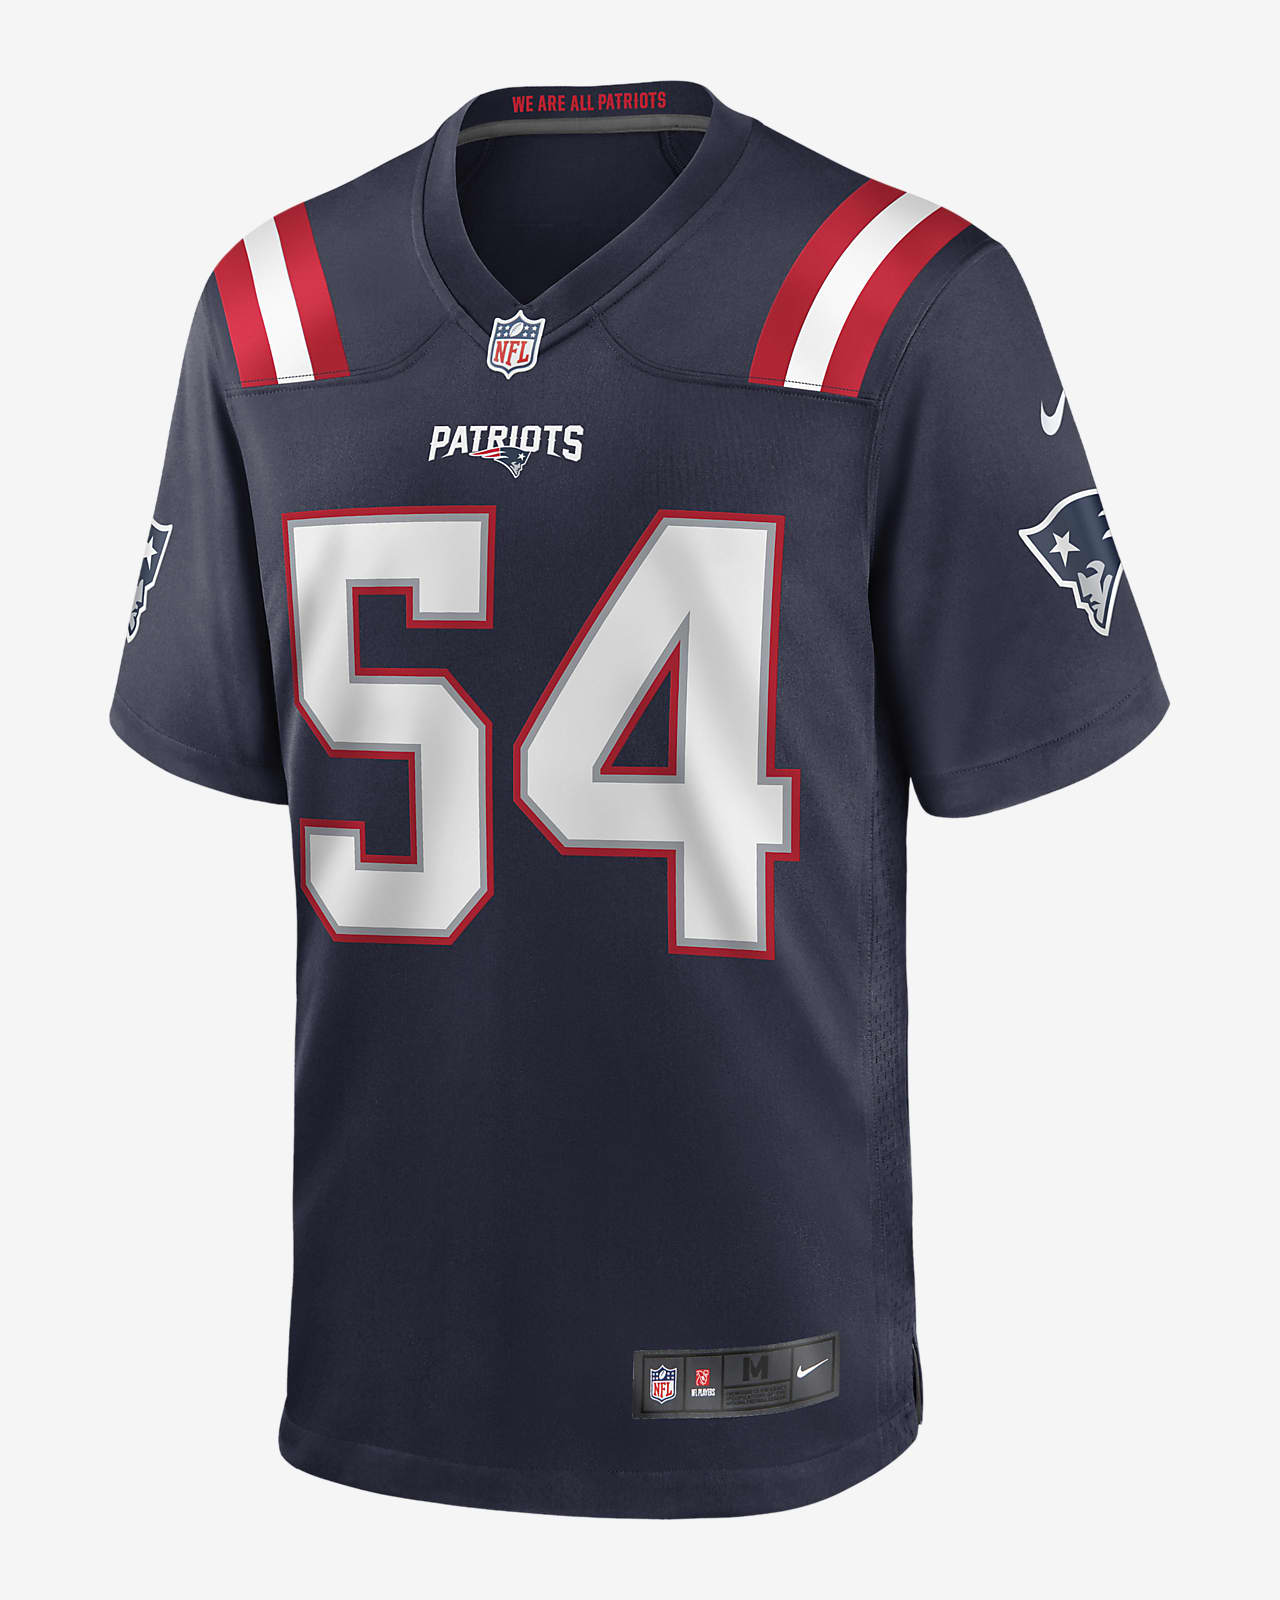 NFL New England Patriots (Dont'a Hightower) Men's Game Football Jersey